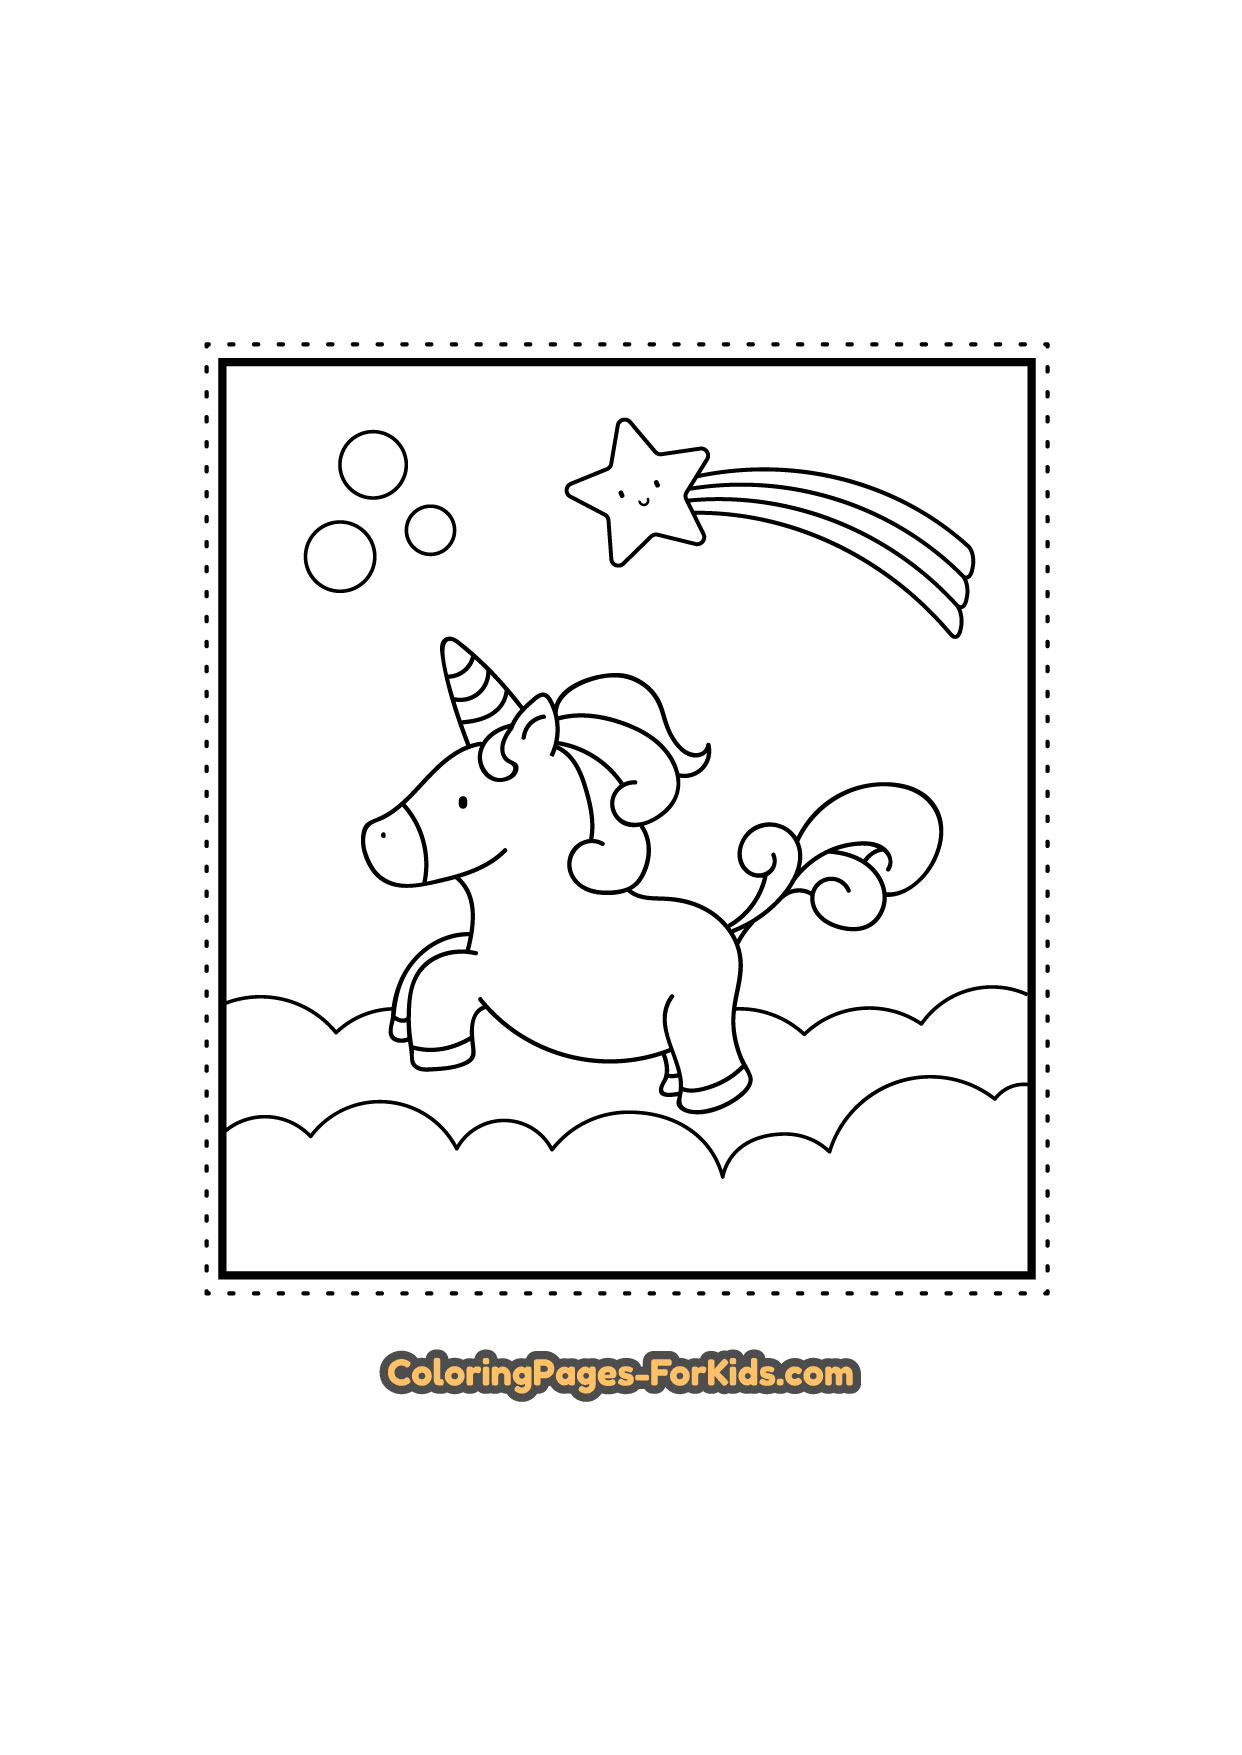 Coloring pages for kids: Unicorn